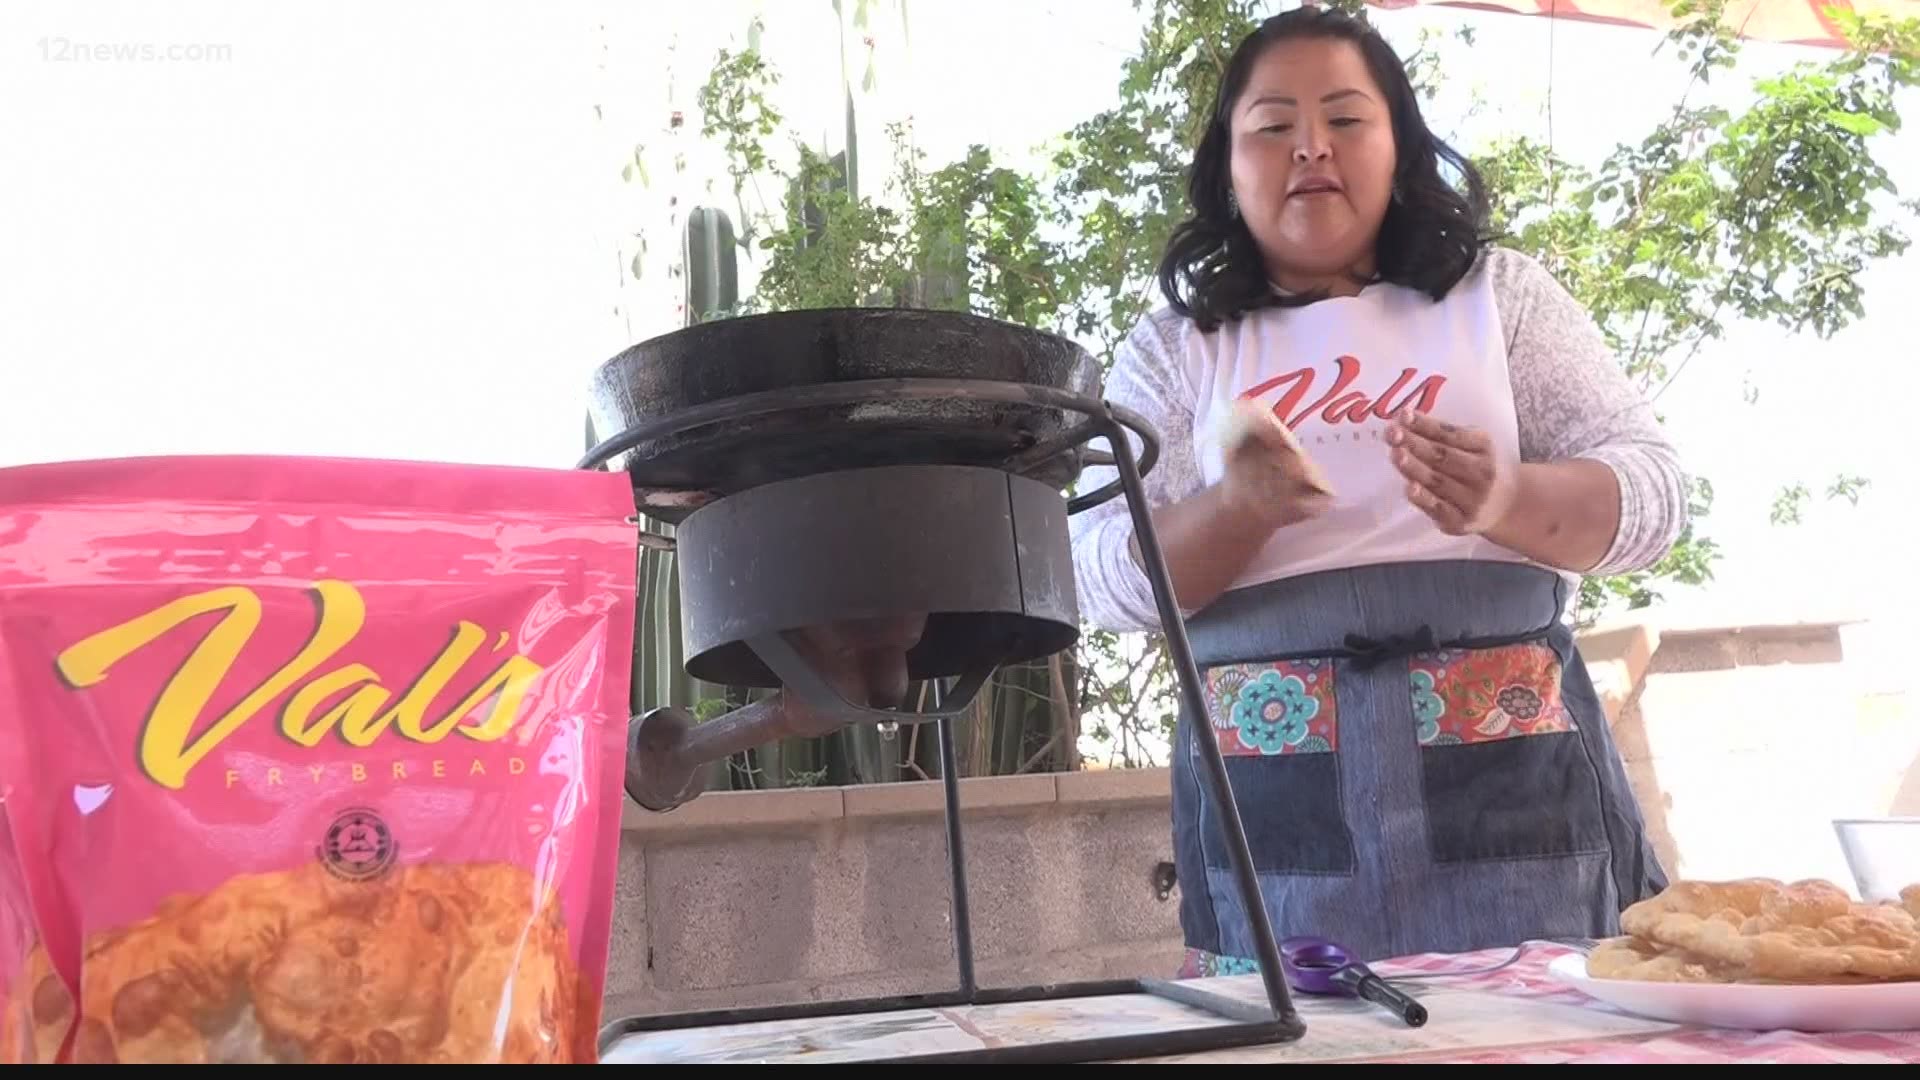 Val's Fry Bread is a thriving small business that hopes to give back to the community. Jen Wahl has more on her story.